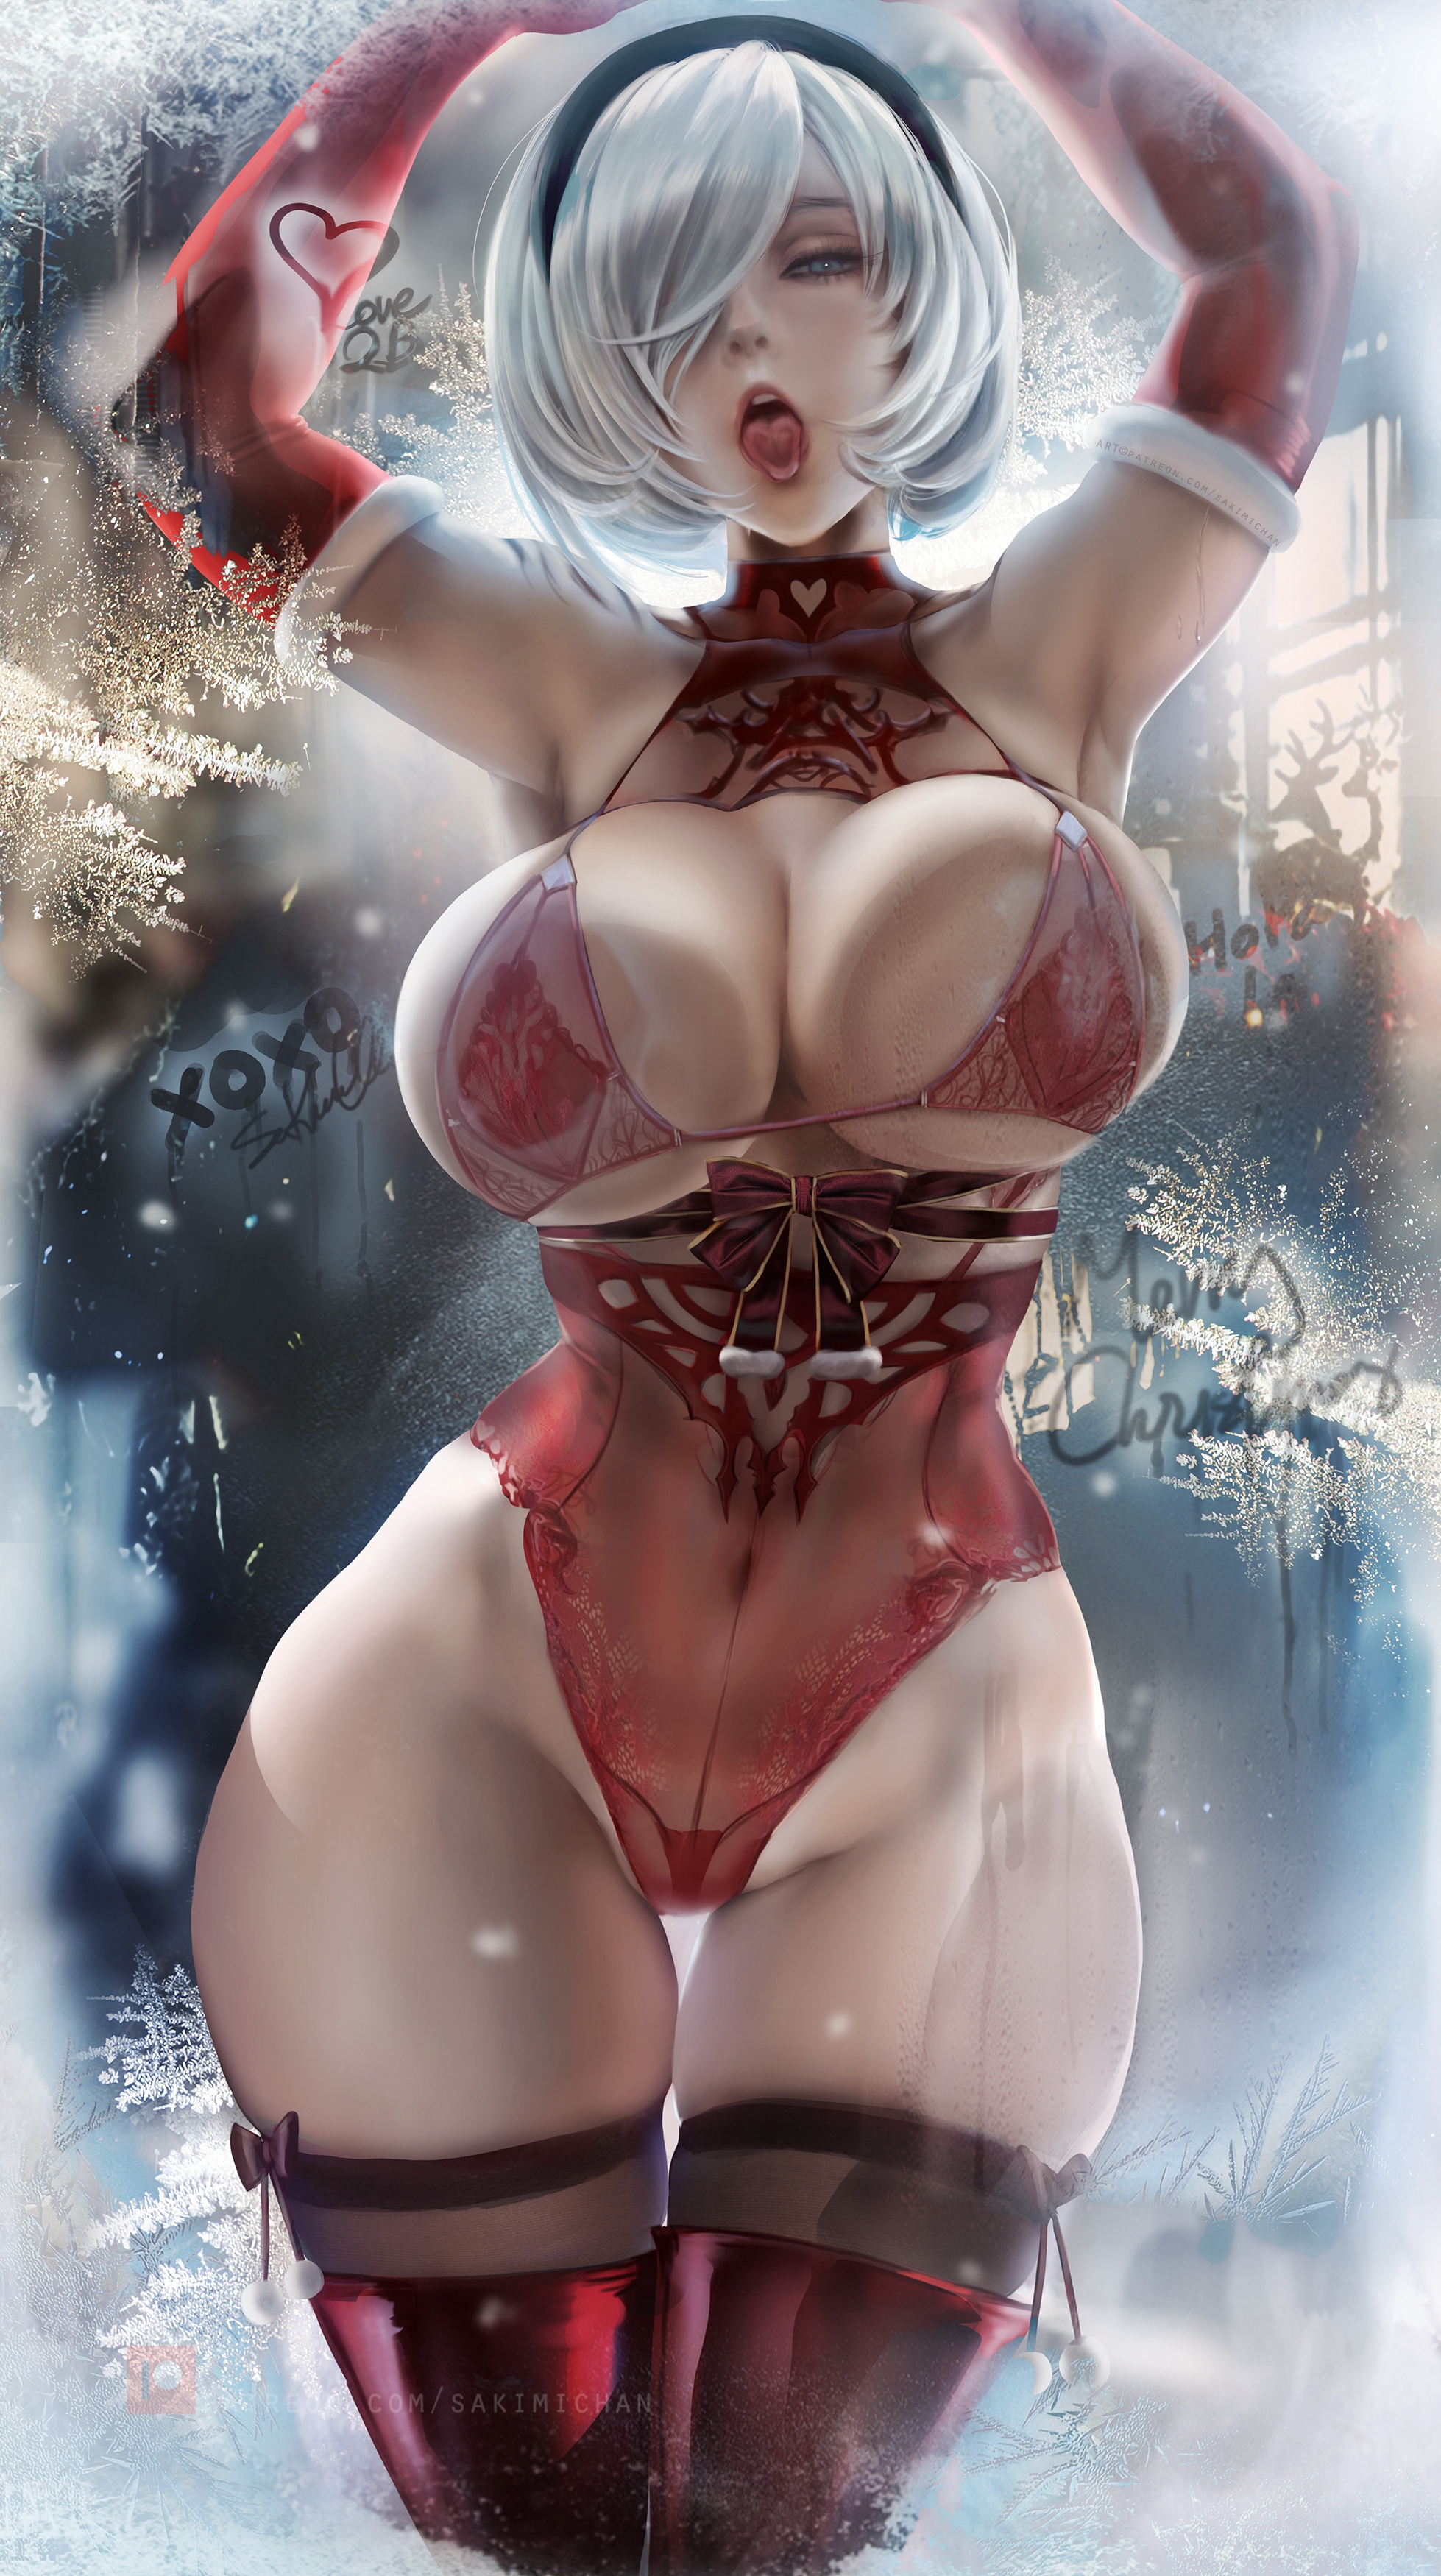 General 1958x3500 video game girls fantasy girl looking at viewer blue eyes white hair headband sensual gaze tongue out licking elbow gloves ribbon lingerie belly the gap thick thigh thighs curvy stockings thigh-highs illustration fan art Sakimichan artwork women Christmas boobs on glass 2B (Nier: Automata)